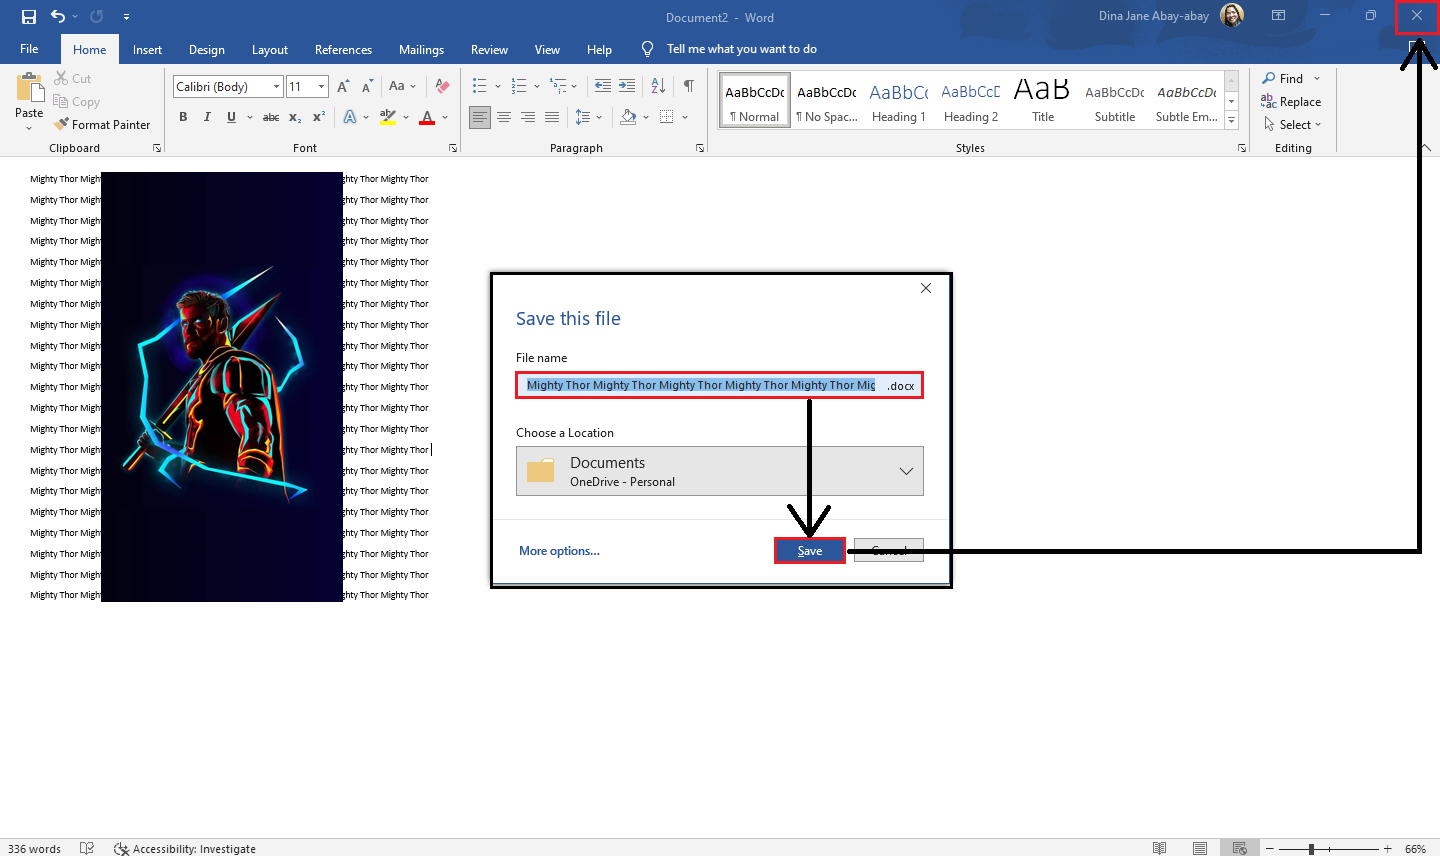 Drag and adjust your image on Word document and save it. Make sure to close the Word document once you go to PowerPoint presentation.